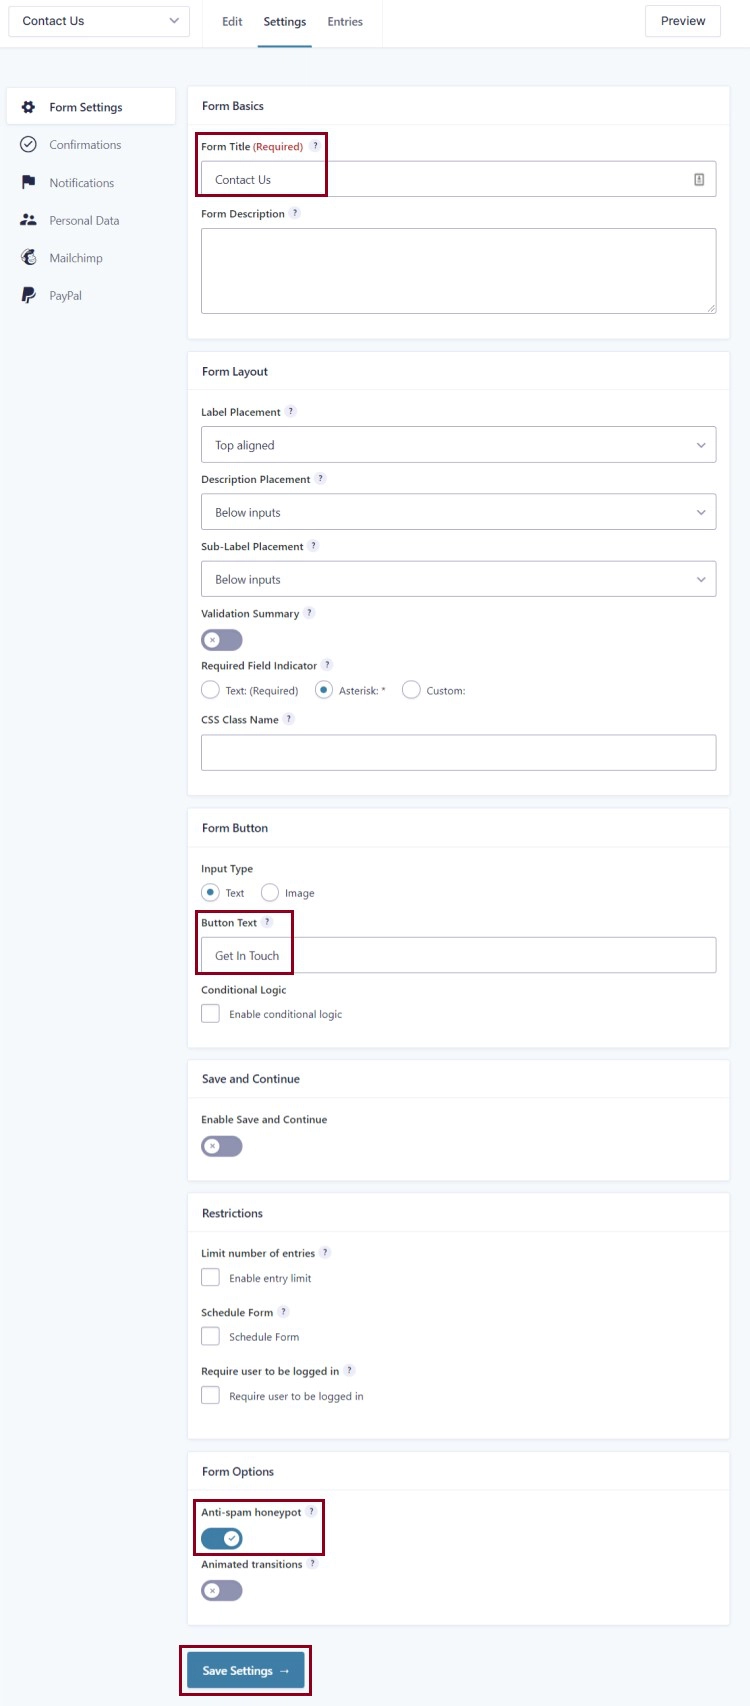 A screenshot of the Form Settings section highlighting Form Title, Button Text, Anti-spam honeypot and Save Settings